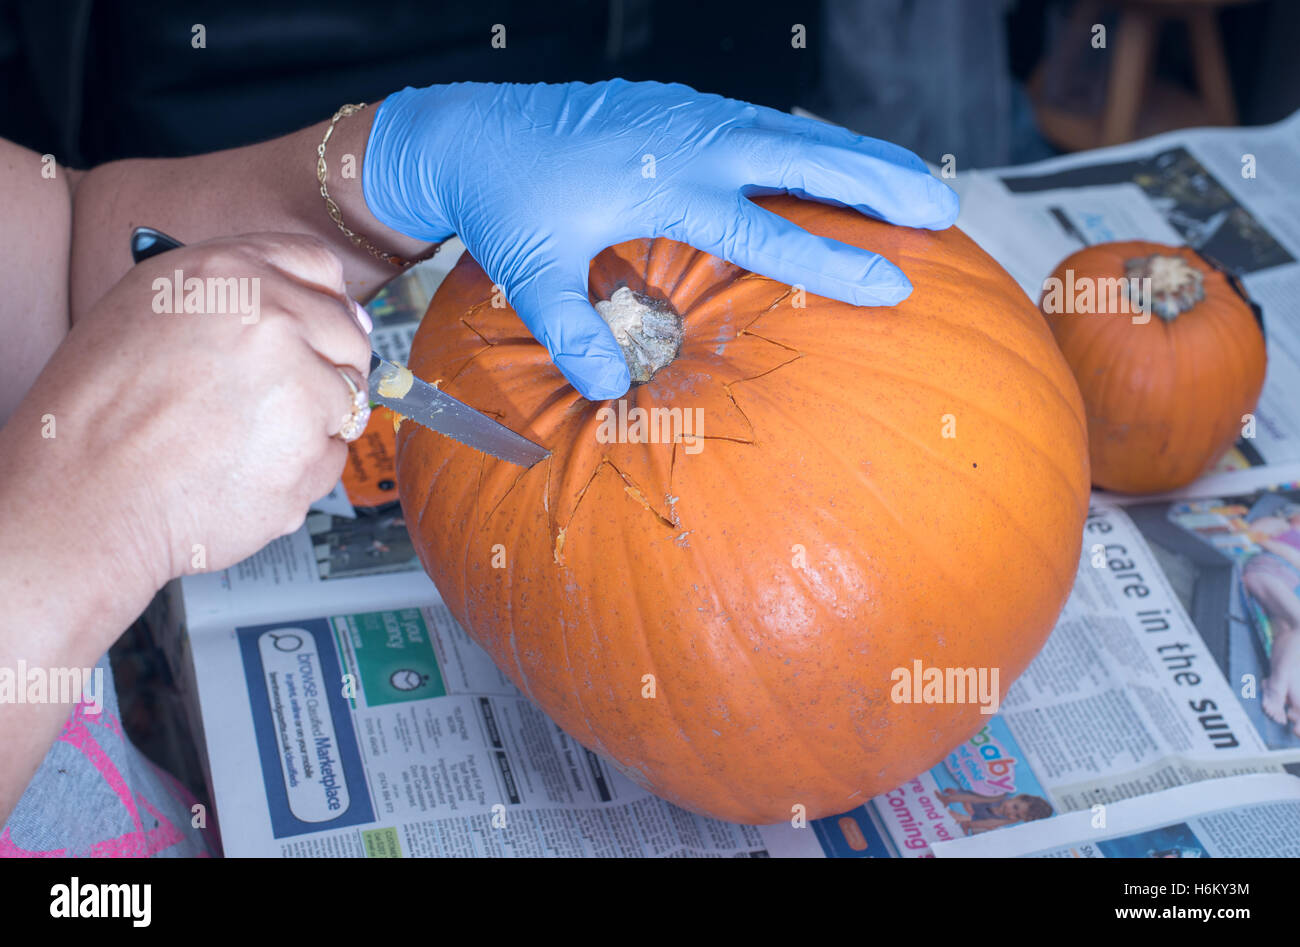 Pumpkin carving - opening it up Stock Photo